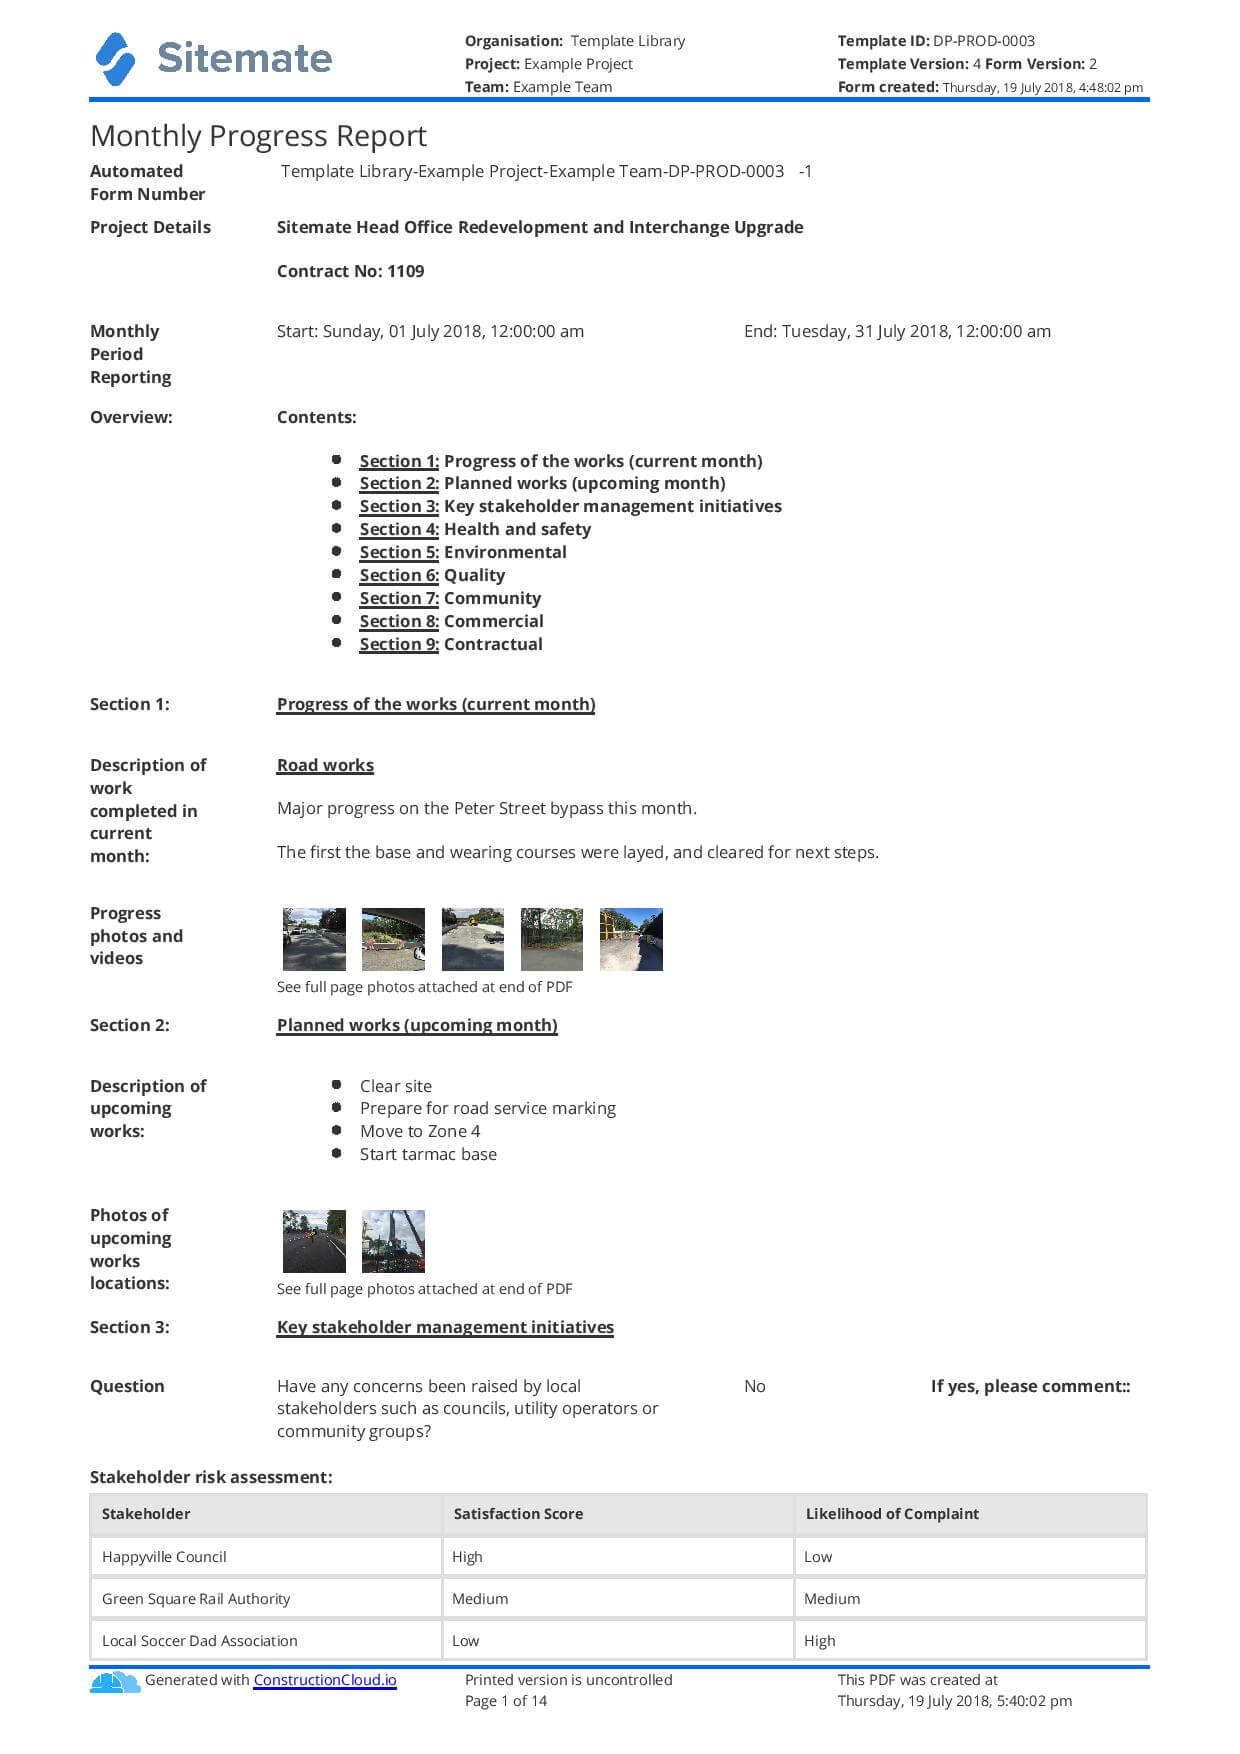 Monthly Construction Progress Report Template: Use This For How To Write A Monthly Report Template